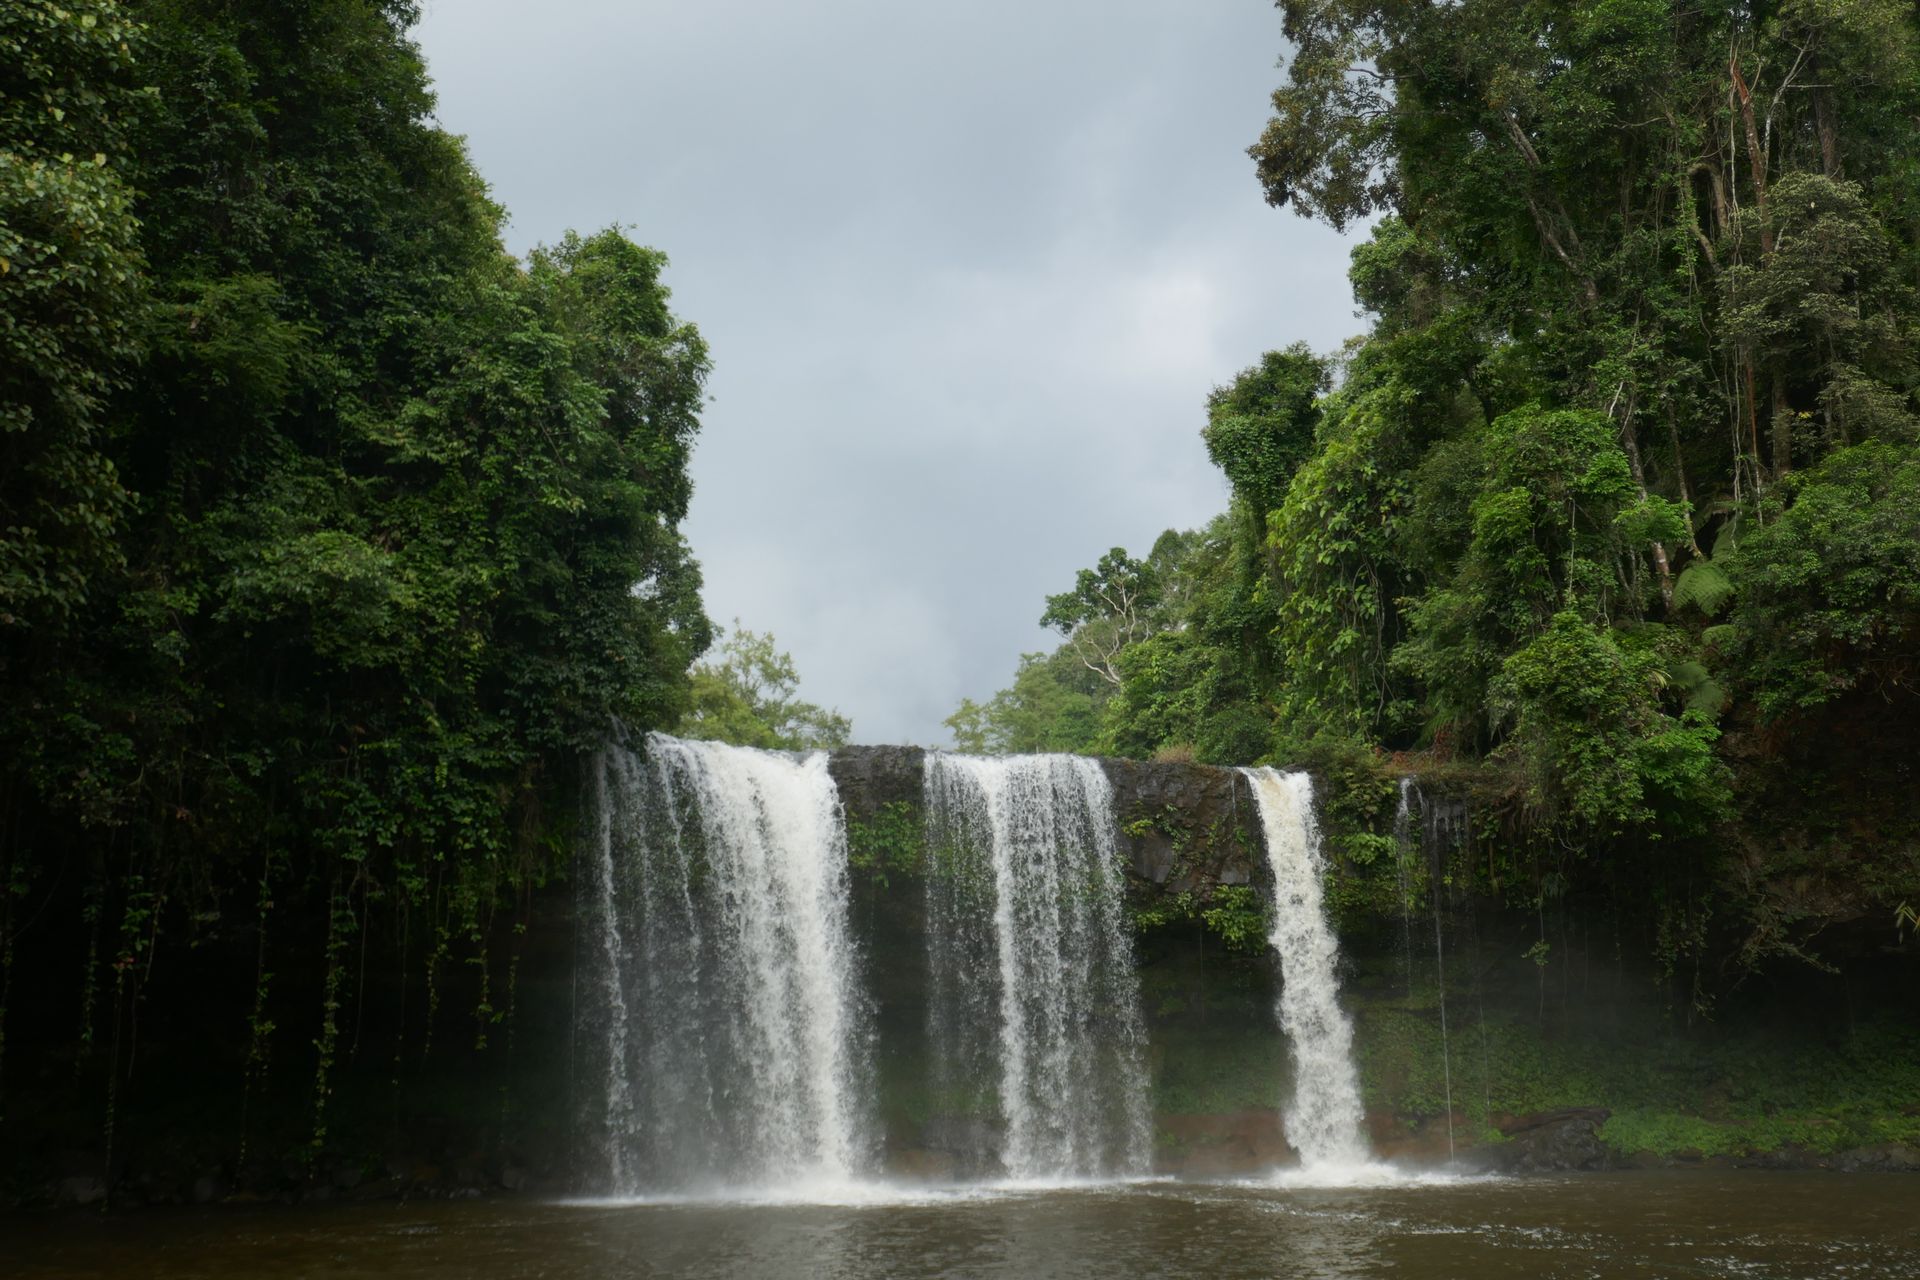 The Tad Champi was the third waterfall in the group (but there are still several more waterfalls on the Bolaven Plateau)